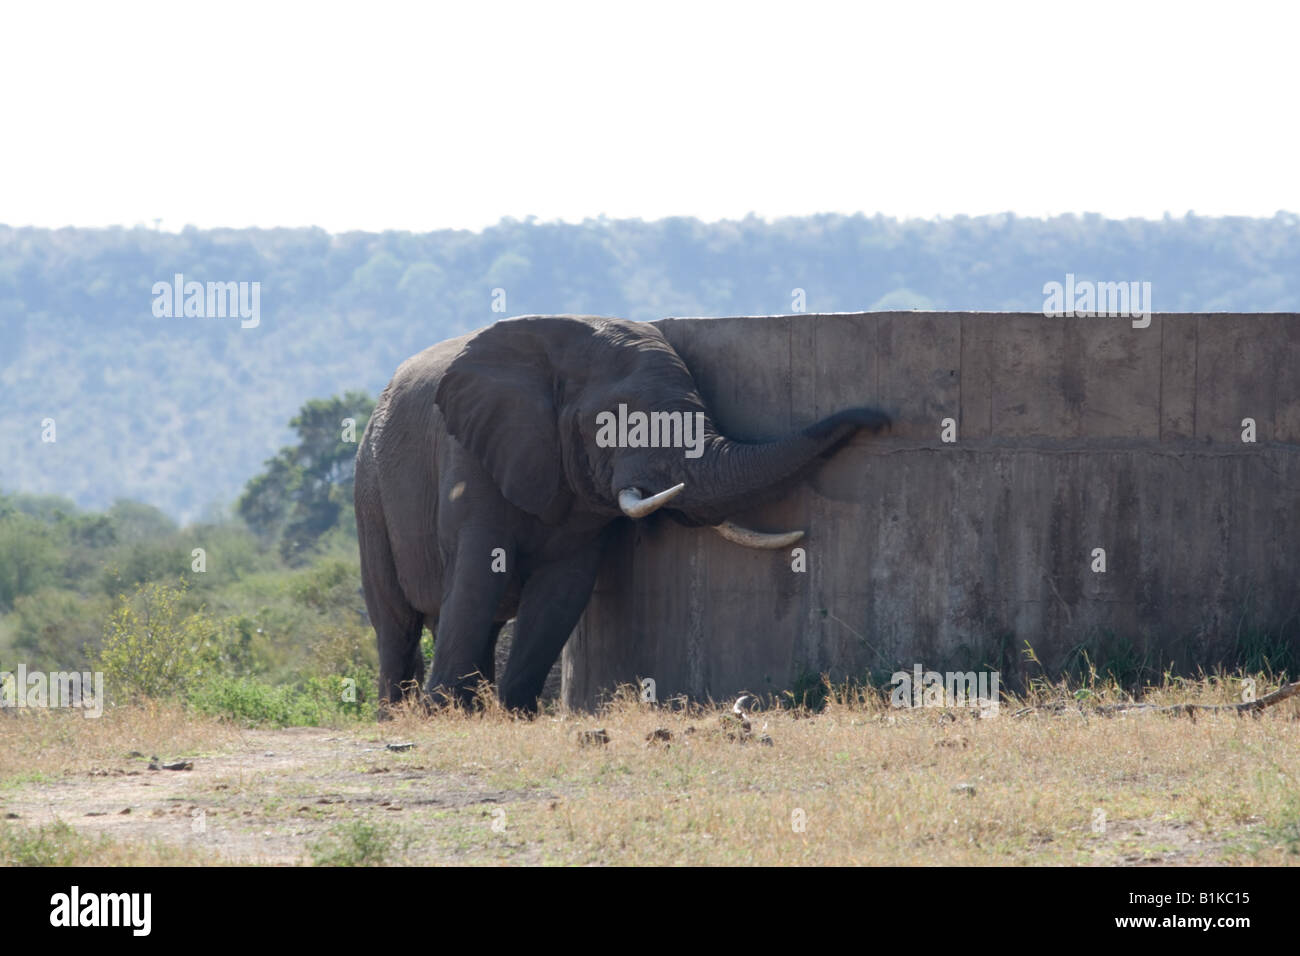 A tired and thirsty elephant seeks water from a man made water tank fed by a bore hole in the Kruger NP South Africa. Stock Photo